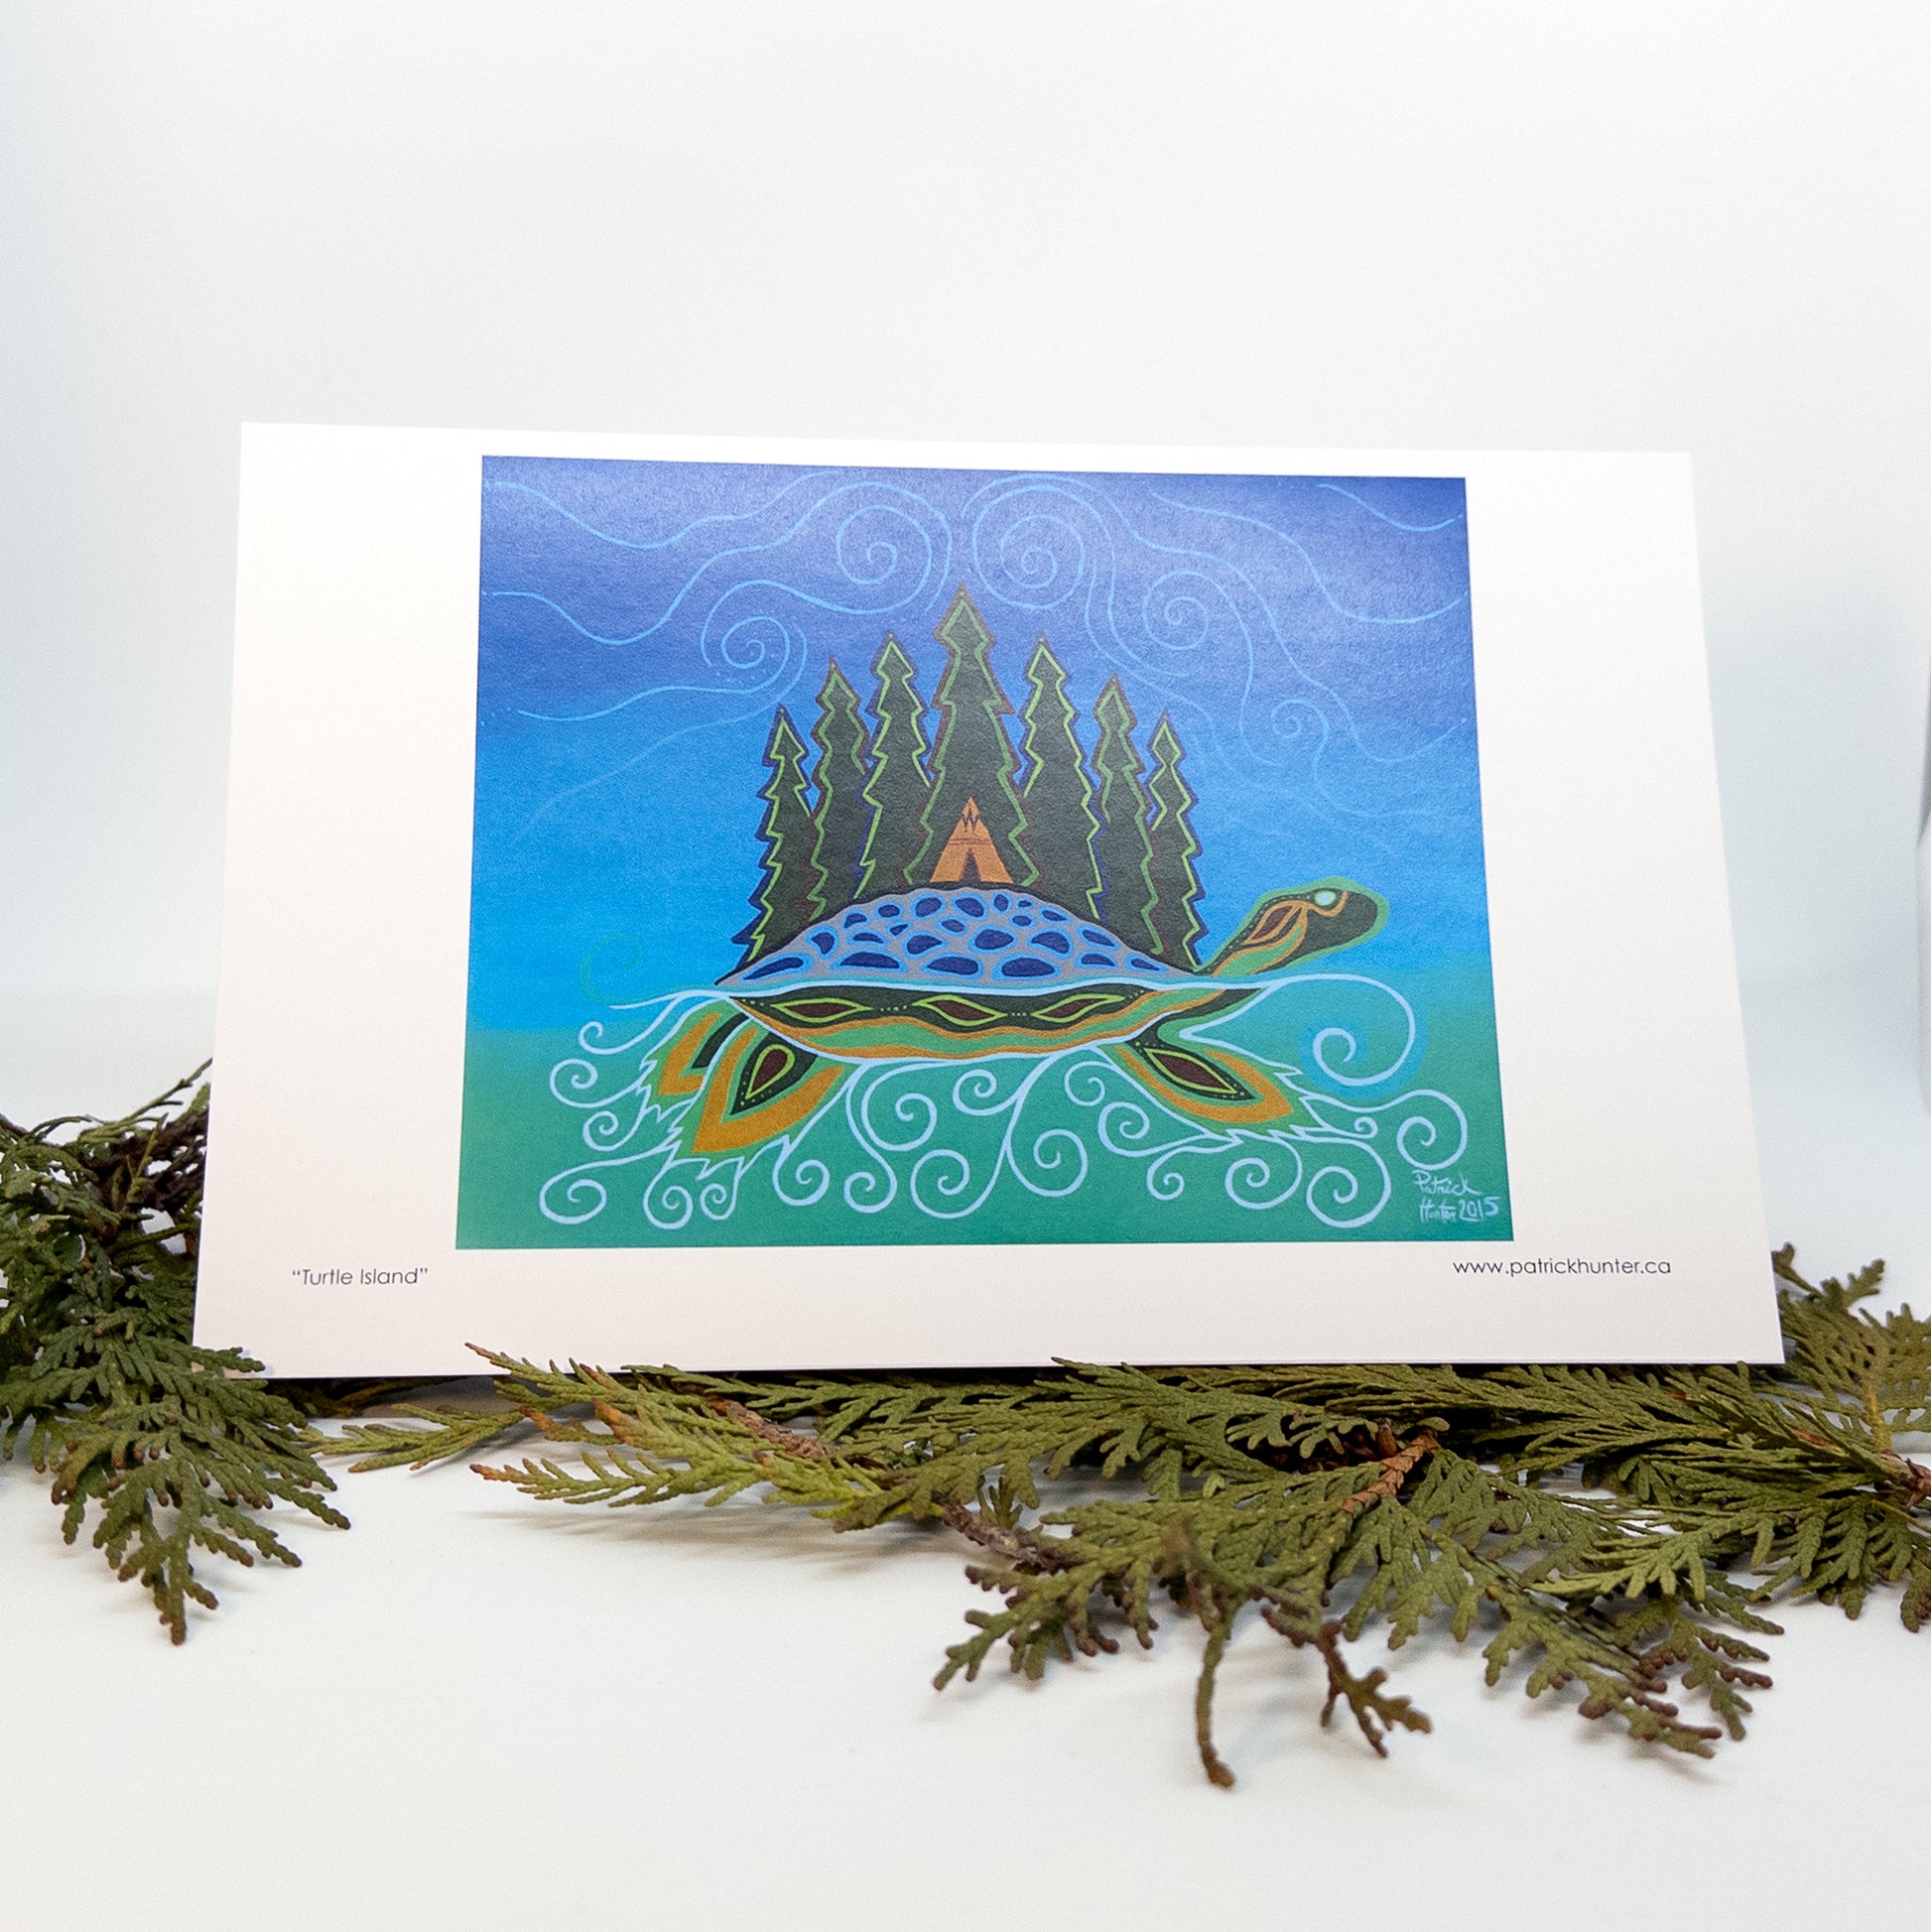 Patrick's painting of Turtle Island in woodland art style as a greeting card standing open on cedar boughs.